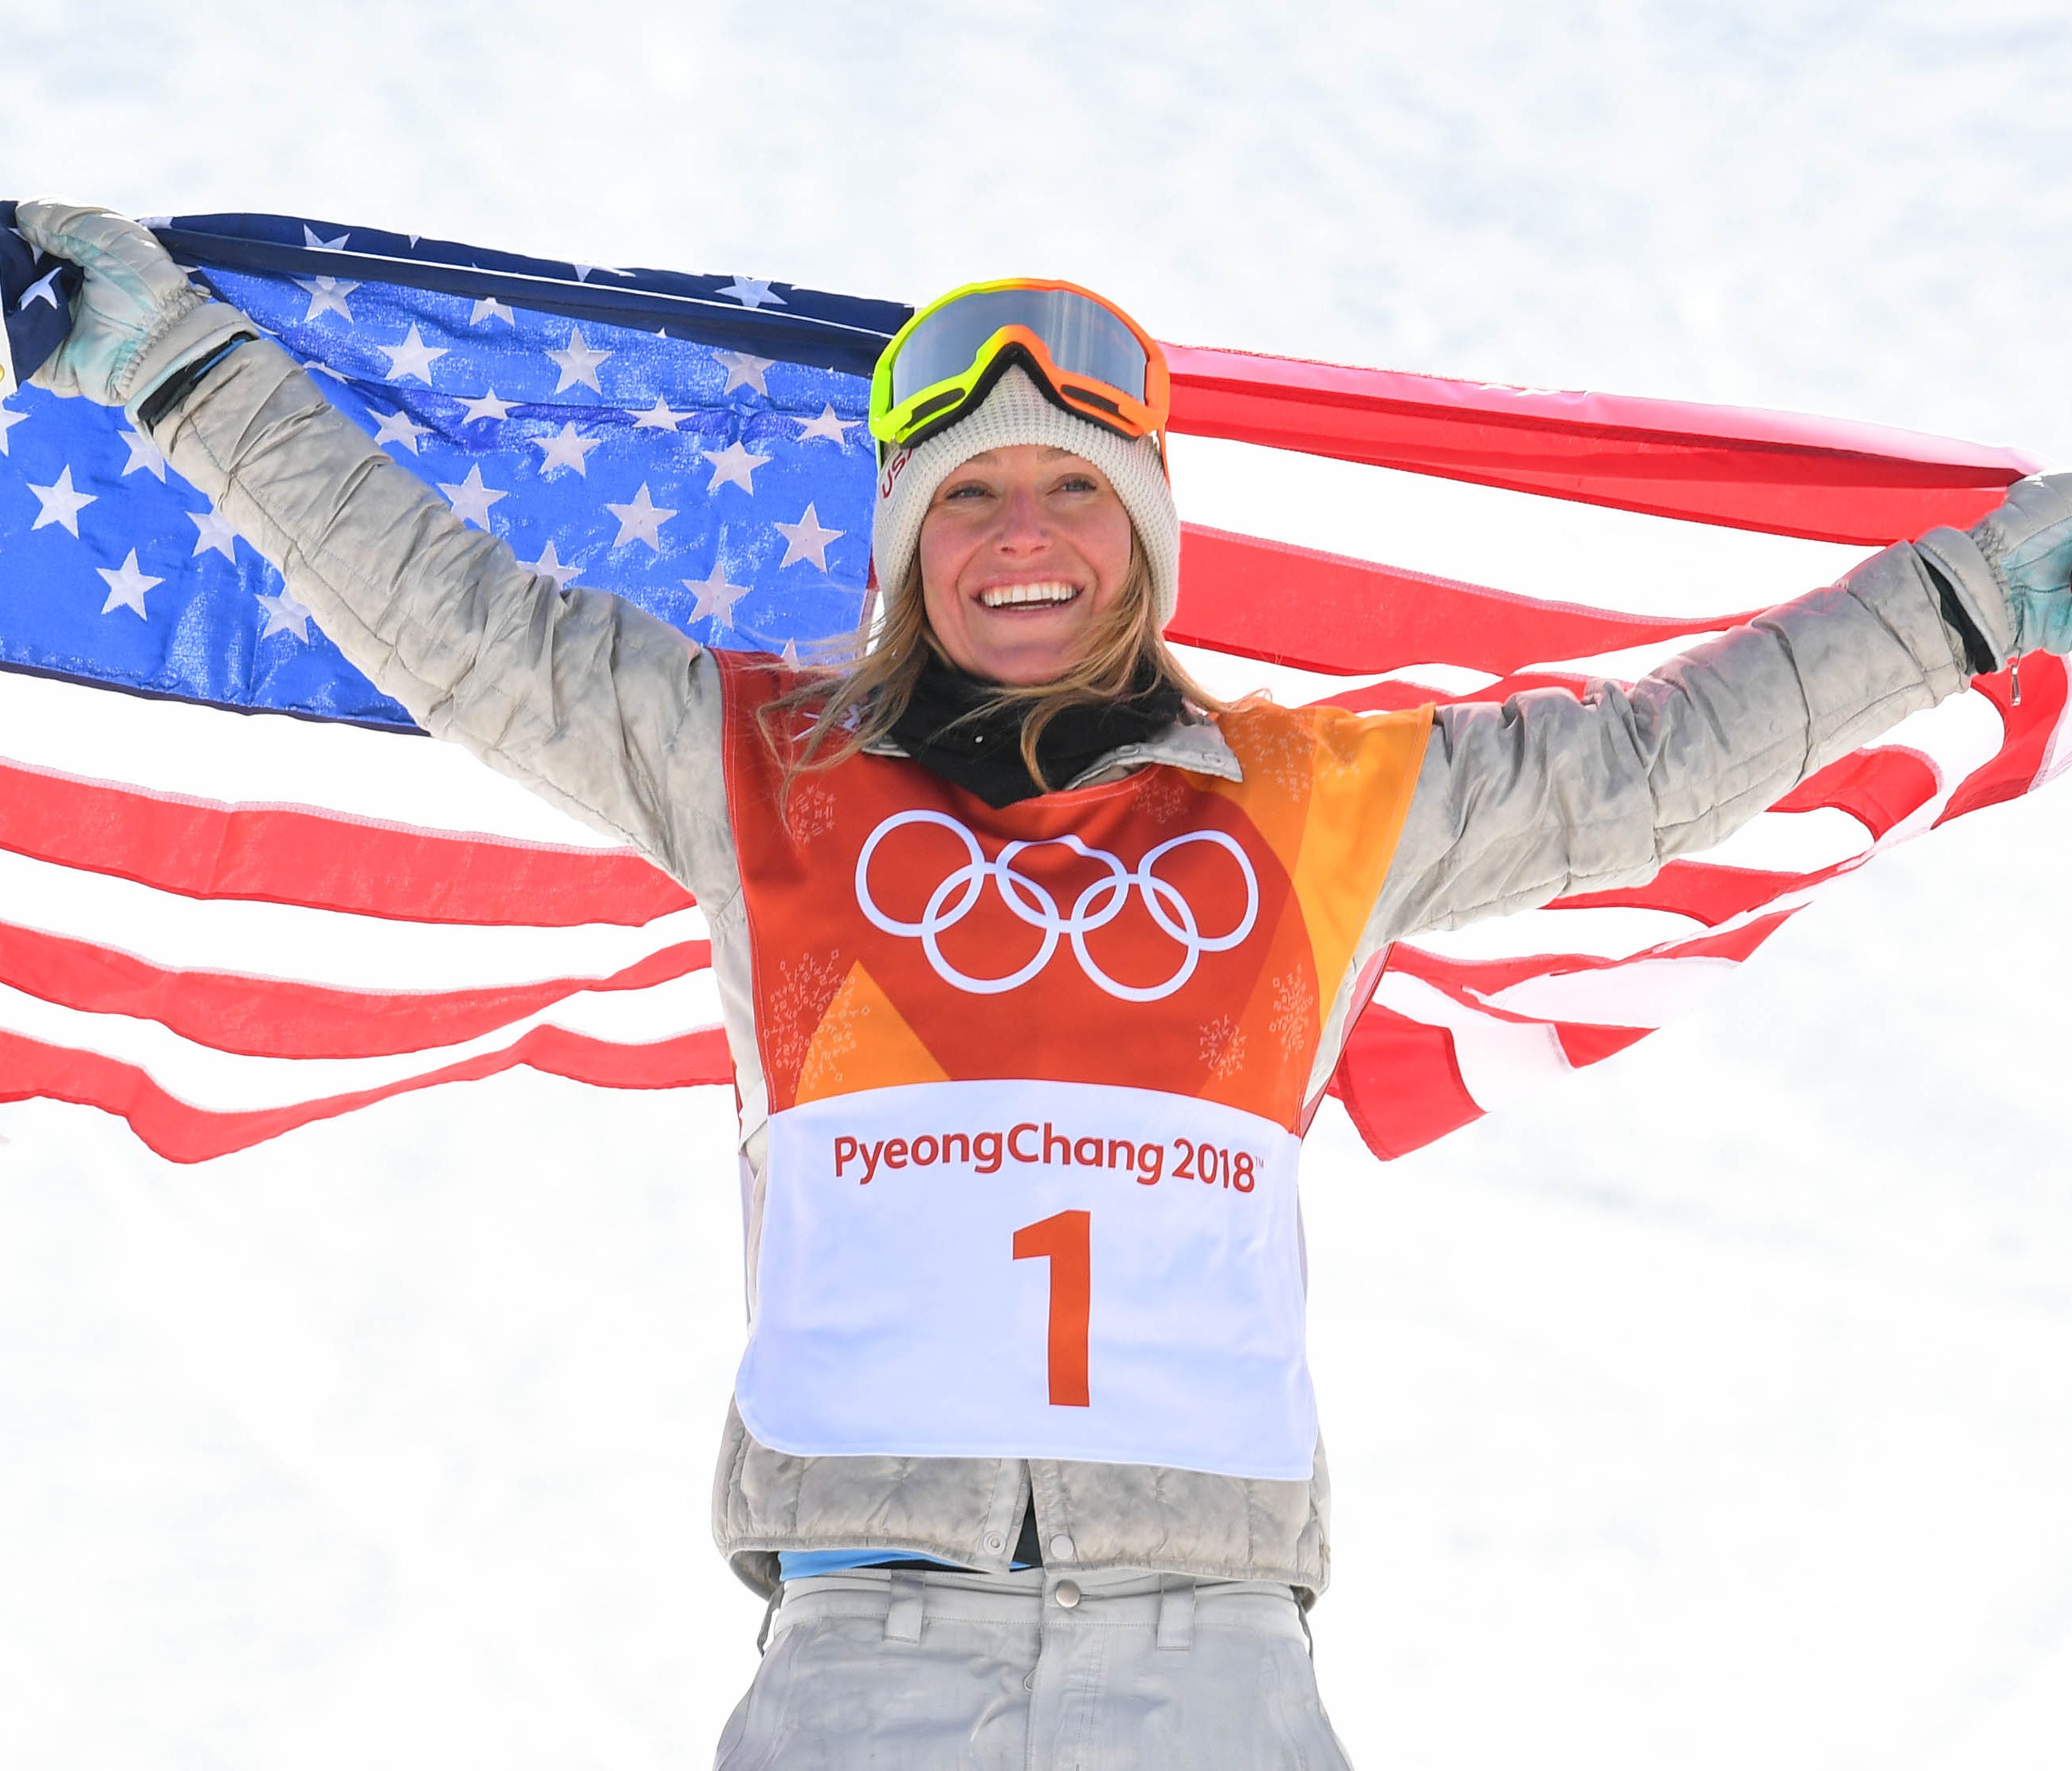 Jamie Anderson celebrates winning gold in the snowboard slopestyle final during the Pyeongchang 2018 Olympic Winter Games at Phoenix Snow Park.